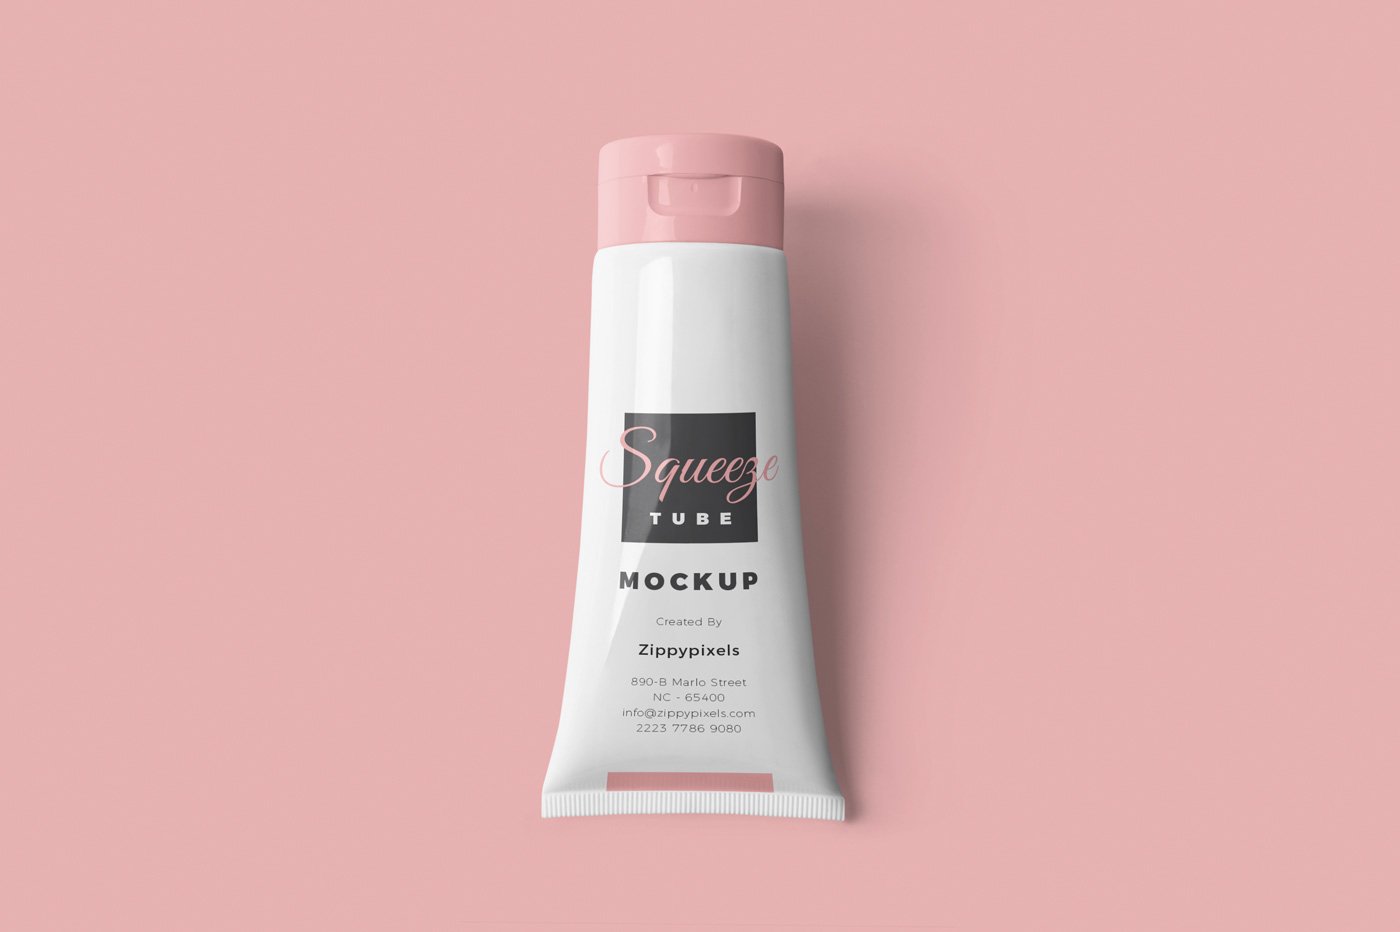 Download Squize Mockup Free - Premium PSD | Cosmetic white squeeze ...